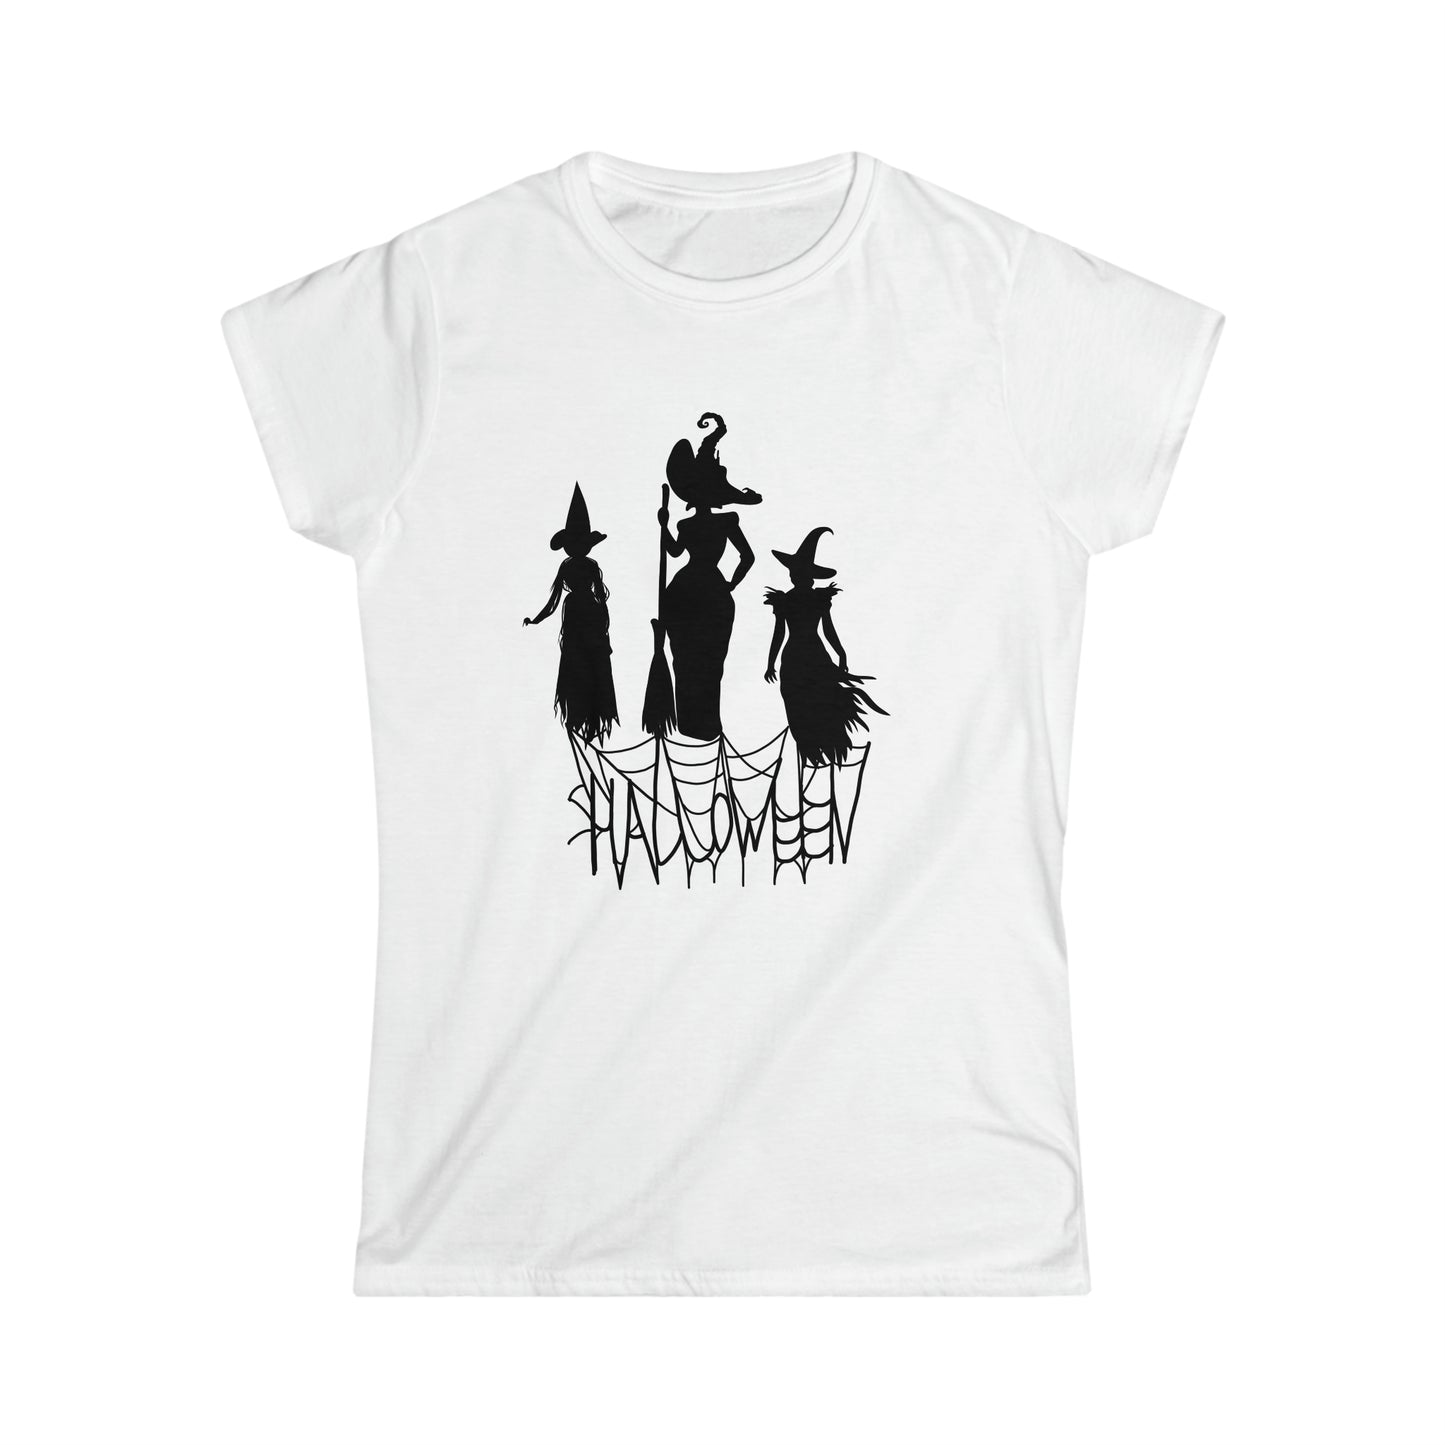 "3 Witches" Women's Soft-style T-Shirt